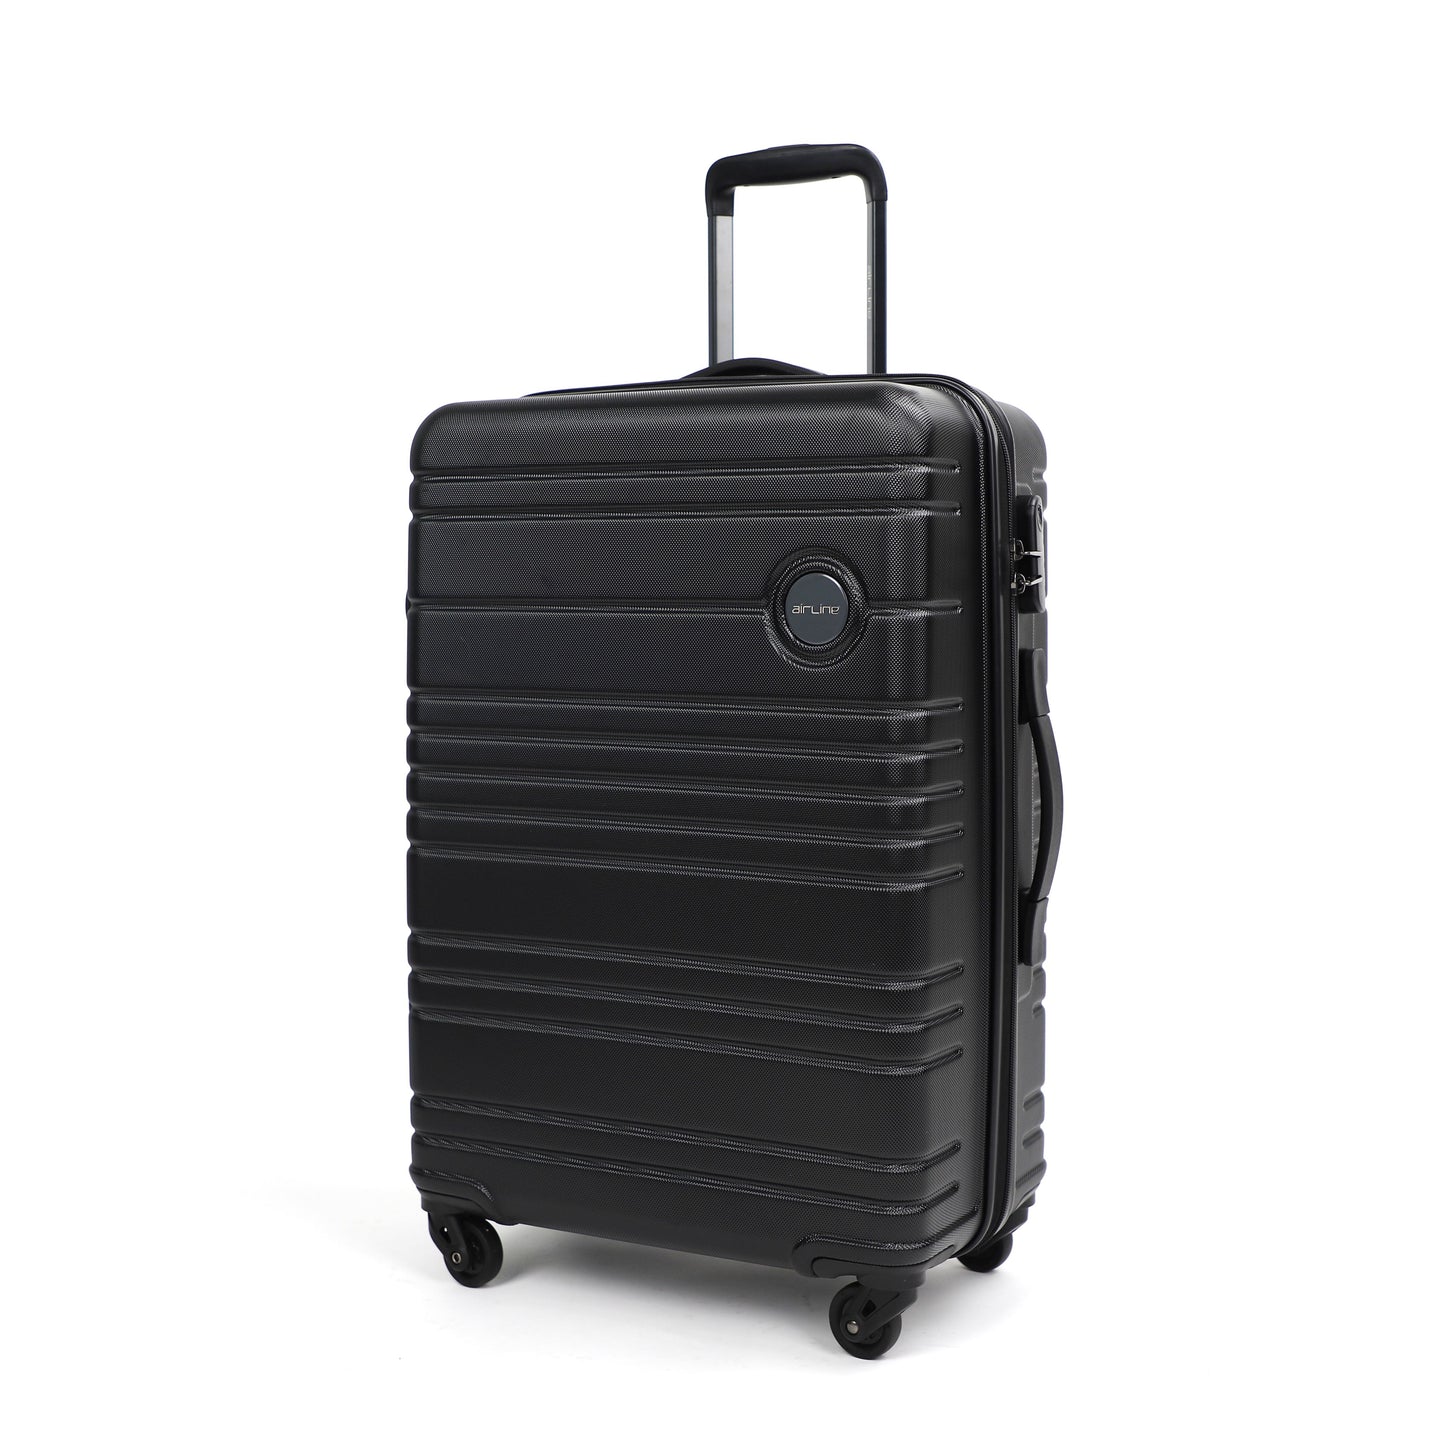 Airline_Luggage_Sets_3pieces_Black_Side_view_N12721001